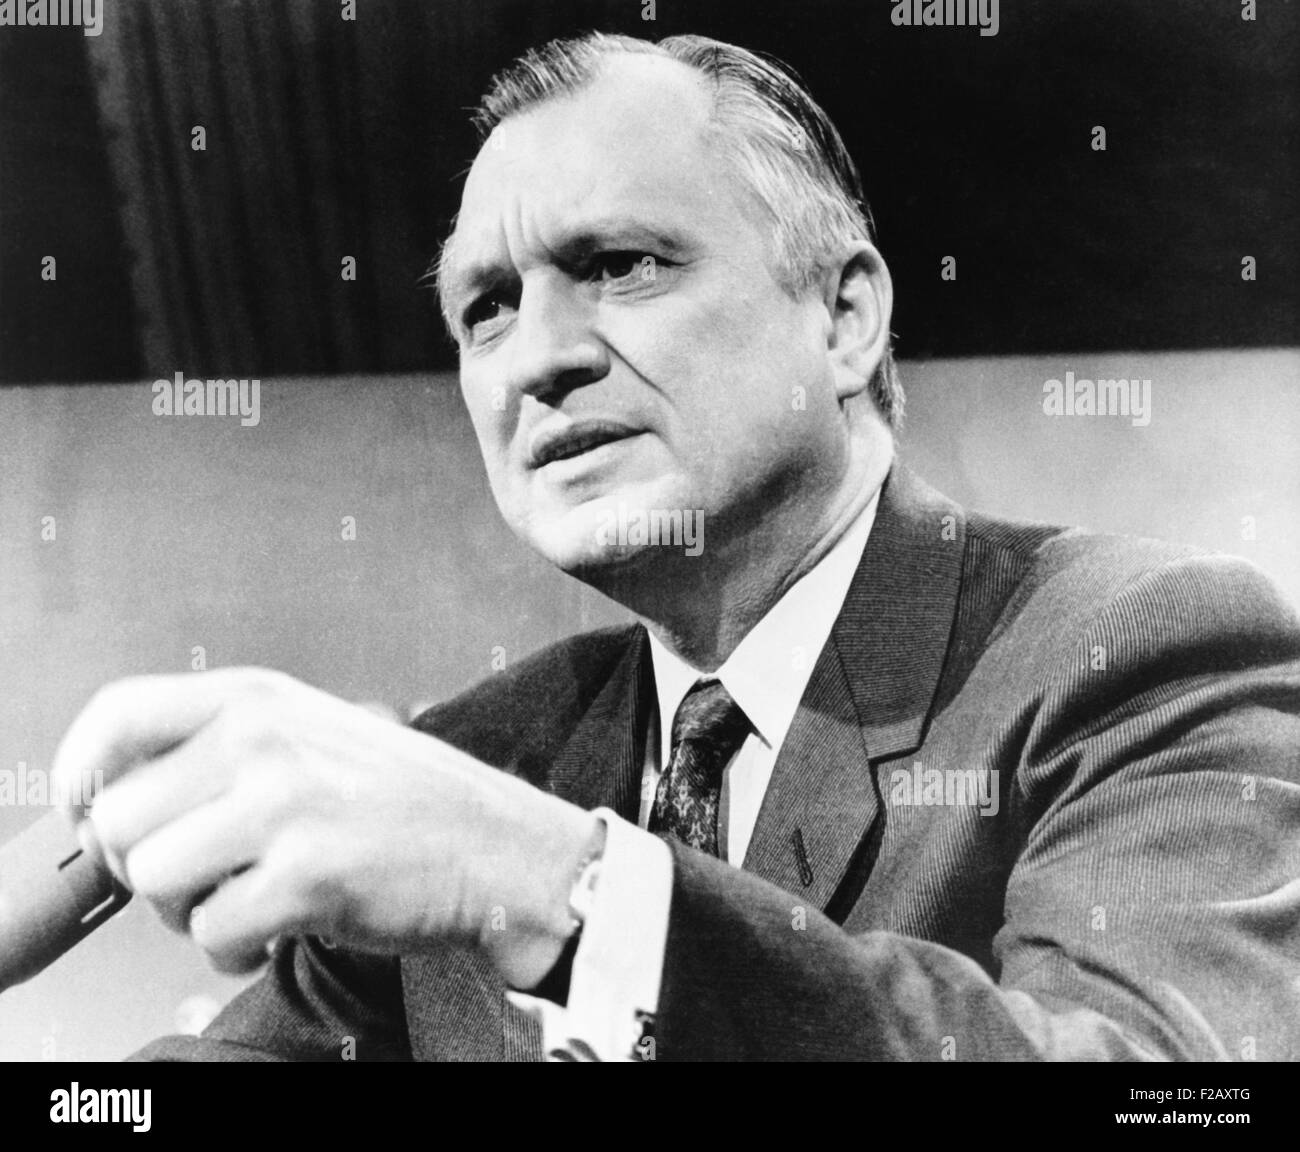 Interior Secretary, Walter Hinkle, was fired by President Richard Nixon, Nov. 25, 1970. The cause was his criticism of Nixon's Vietnam policy and his letter urging Nixon to show more respect for the attitude of young people. (CSU 2015 9 967) Stock Photo